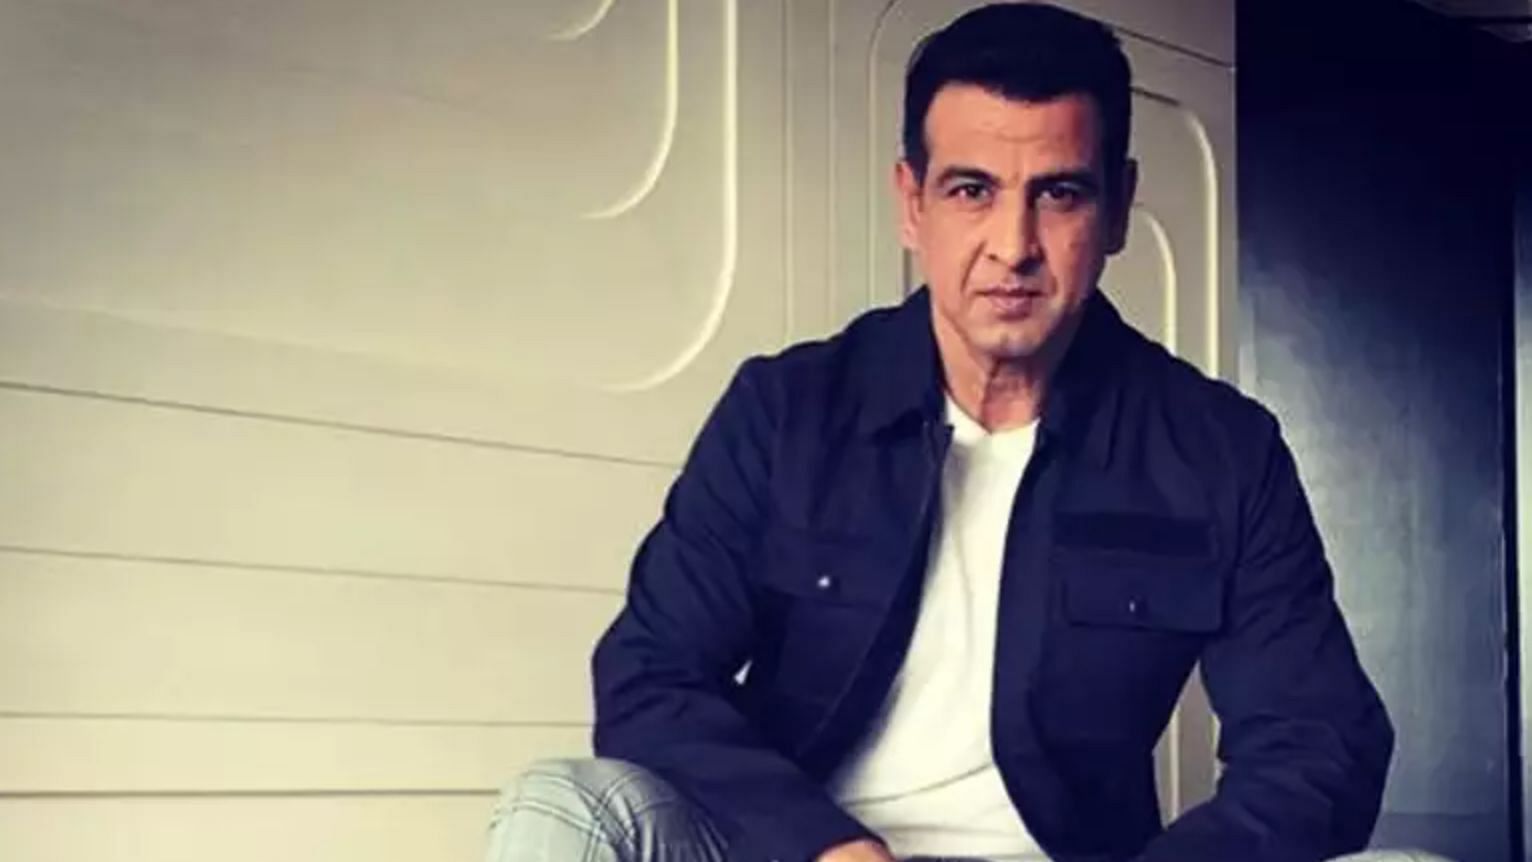 Ronit Roy talks about battling depression and alcoholism at the beginning of his career.